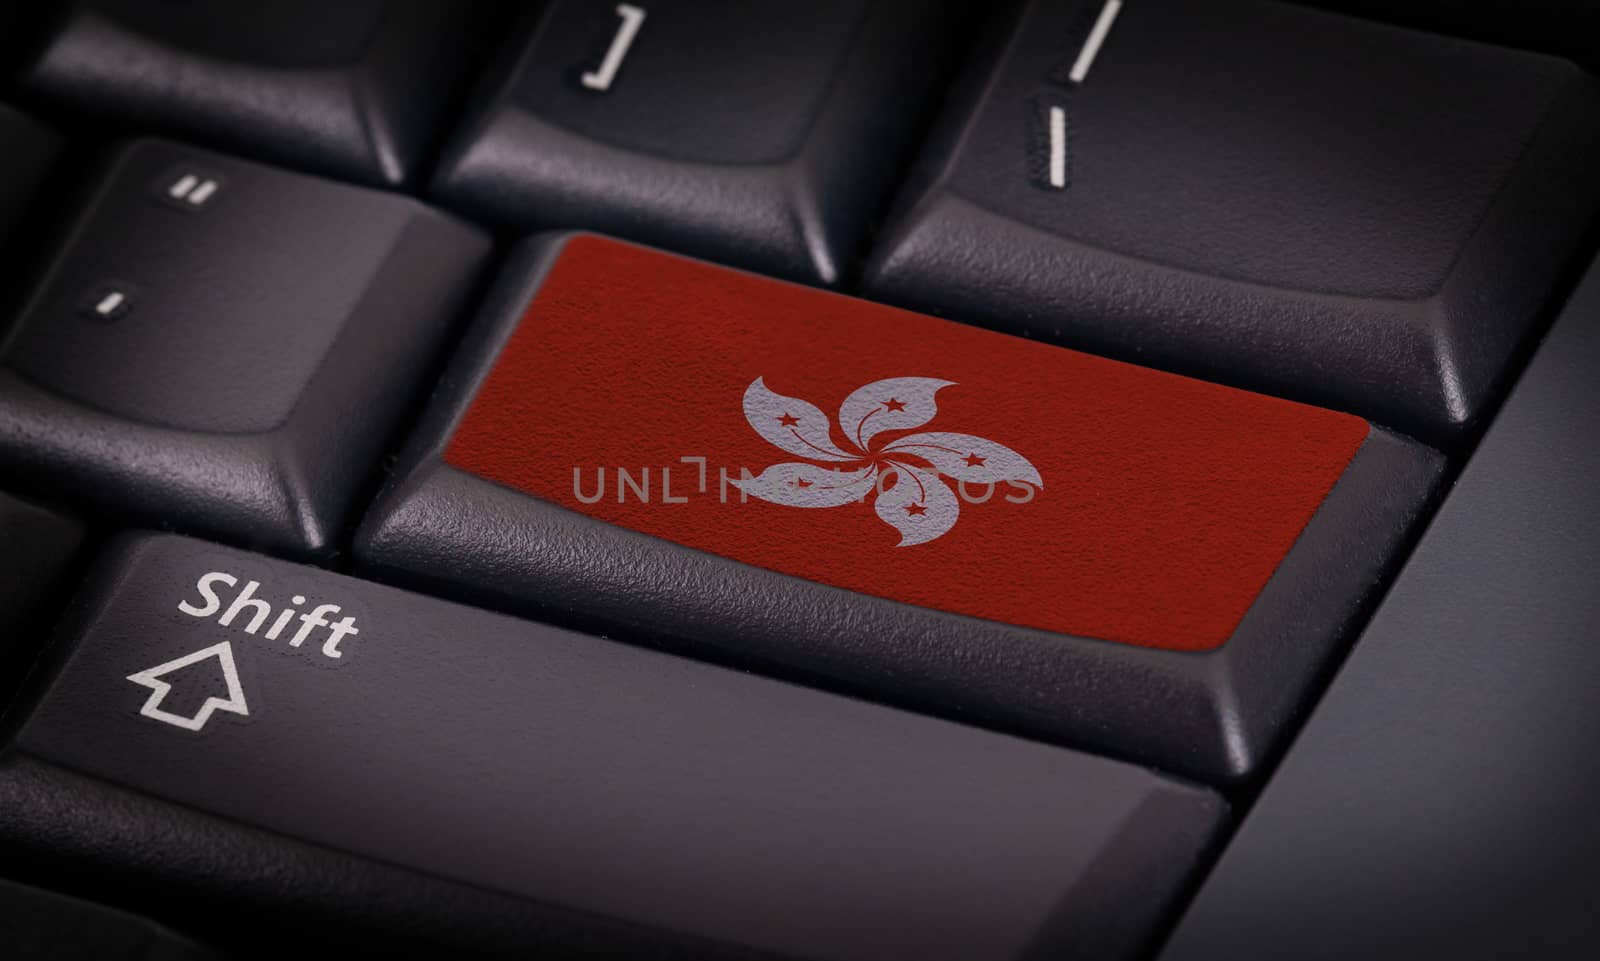 Flag on keyboard by michaklootwijk